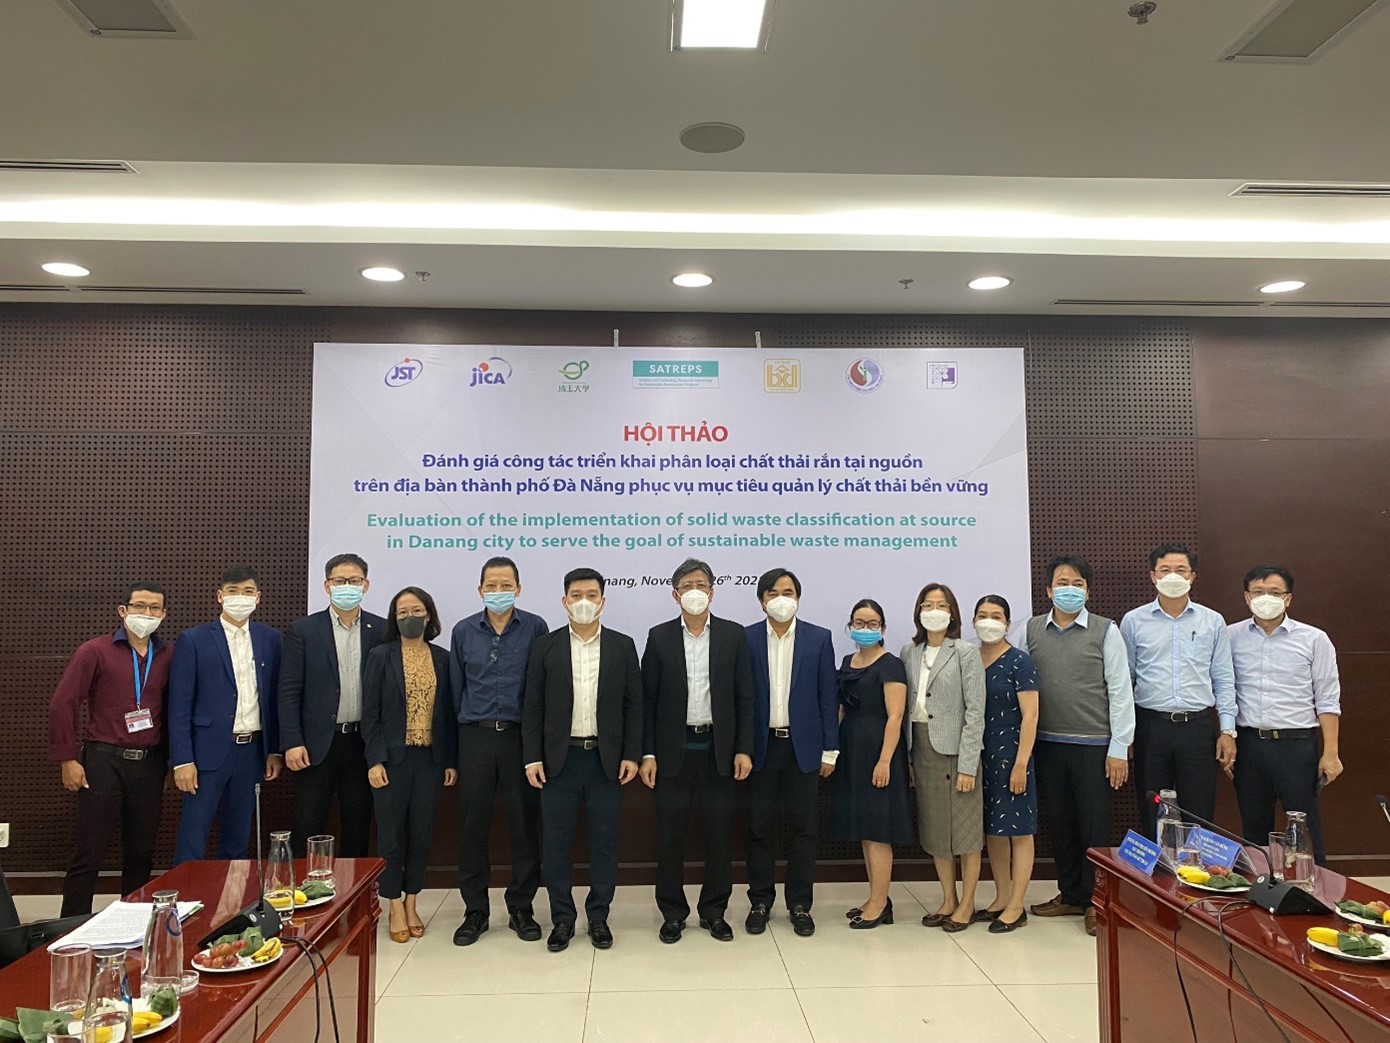 Scientific workshop Co-Organized under the Collaboration of HUCE and Department of Resources and Environment of Danang